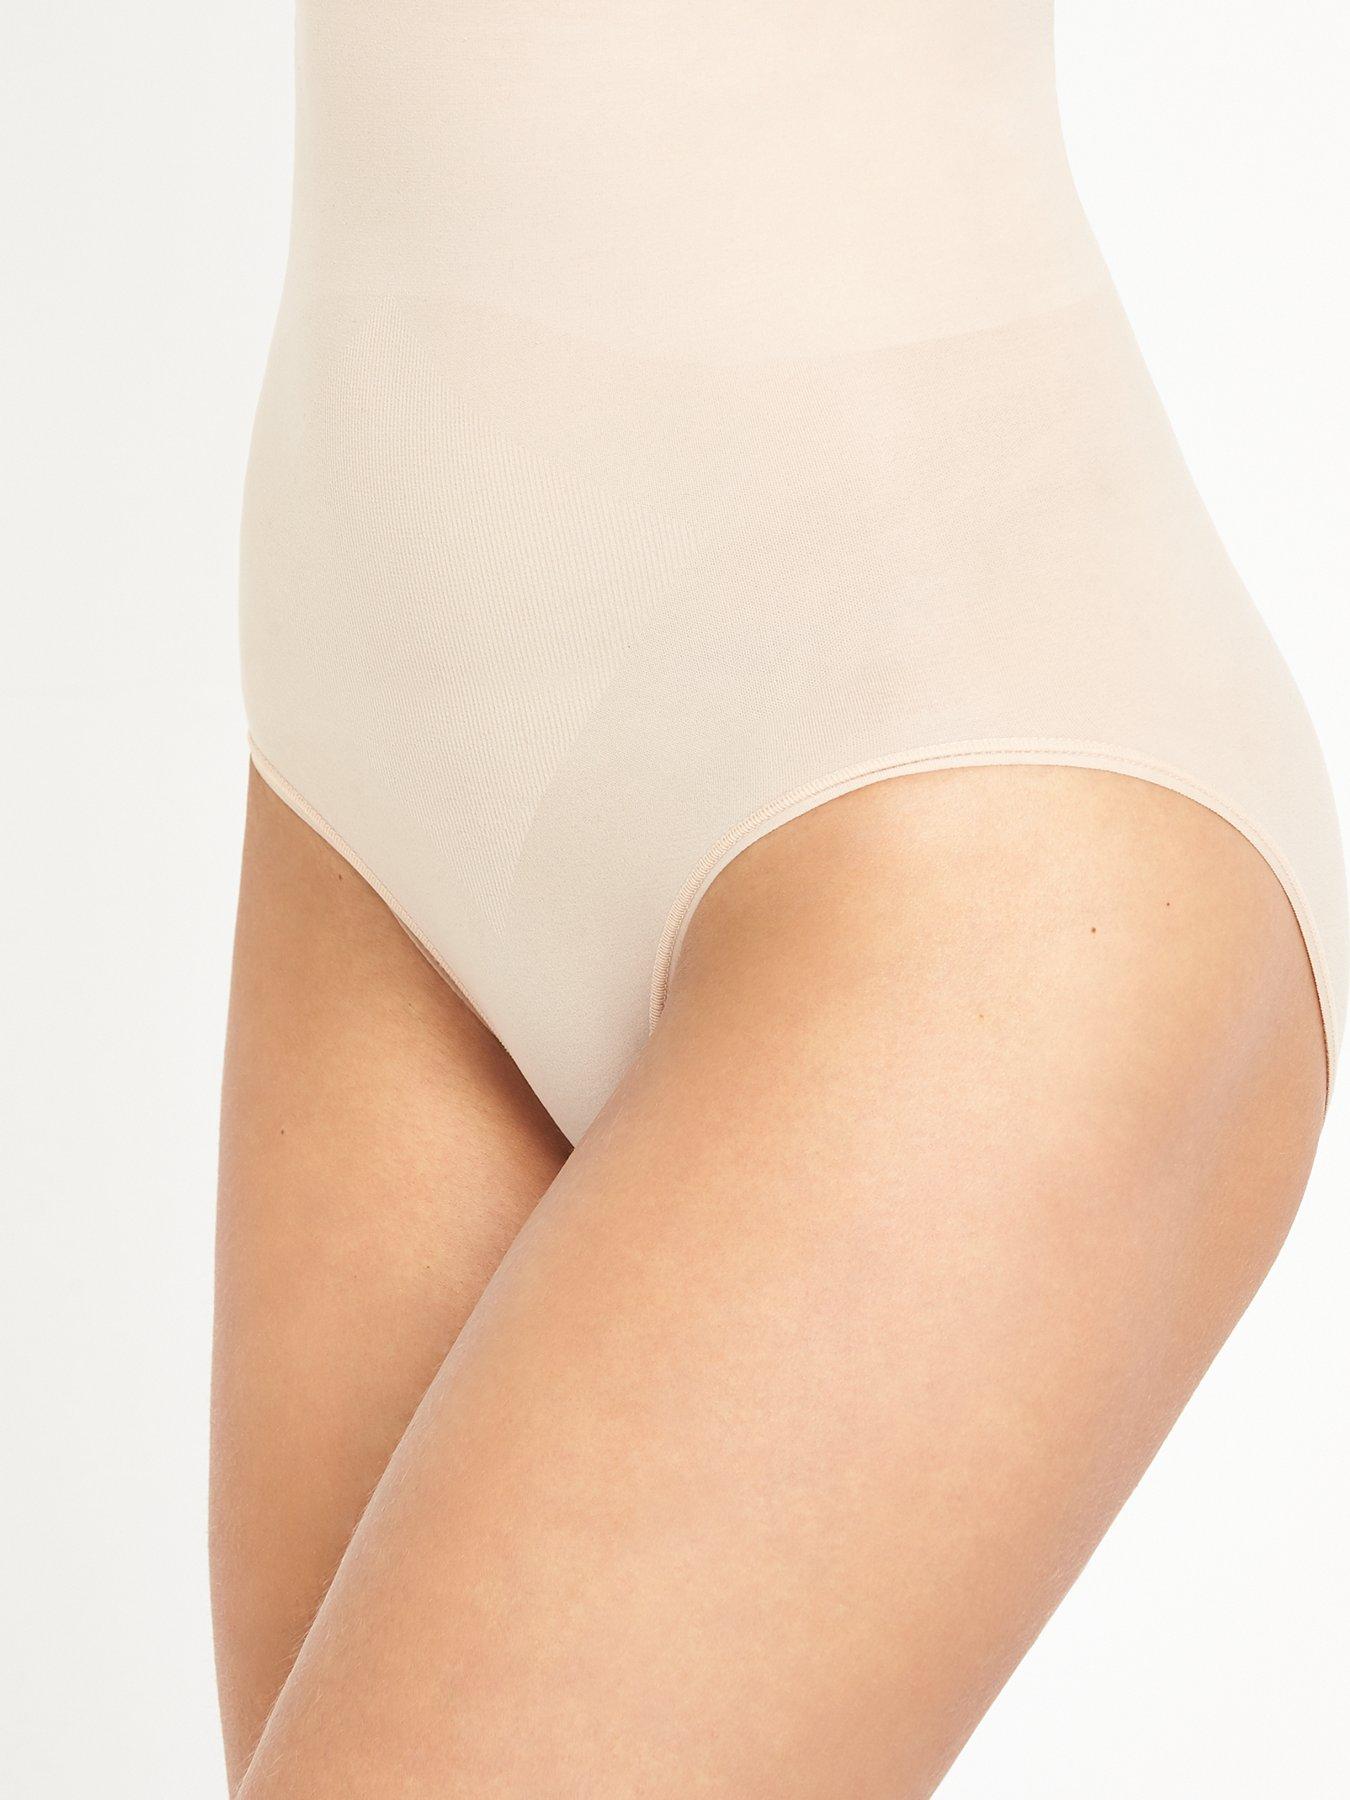 Spanx Higher Power High Waisted Power Panty